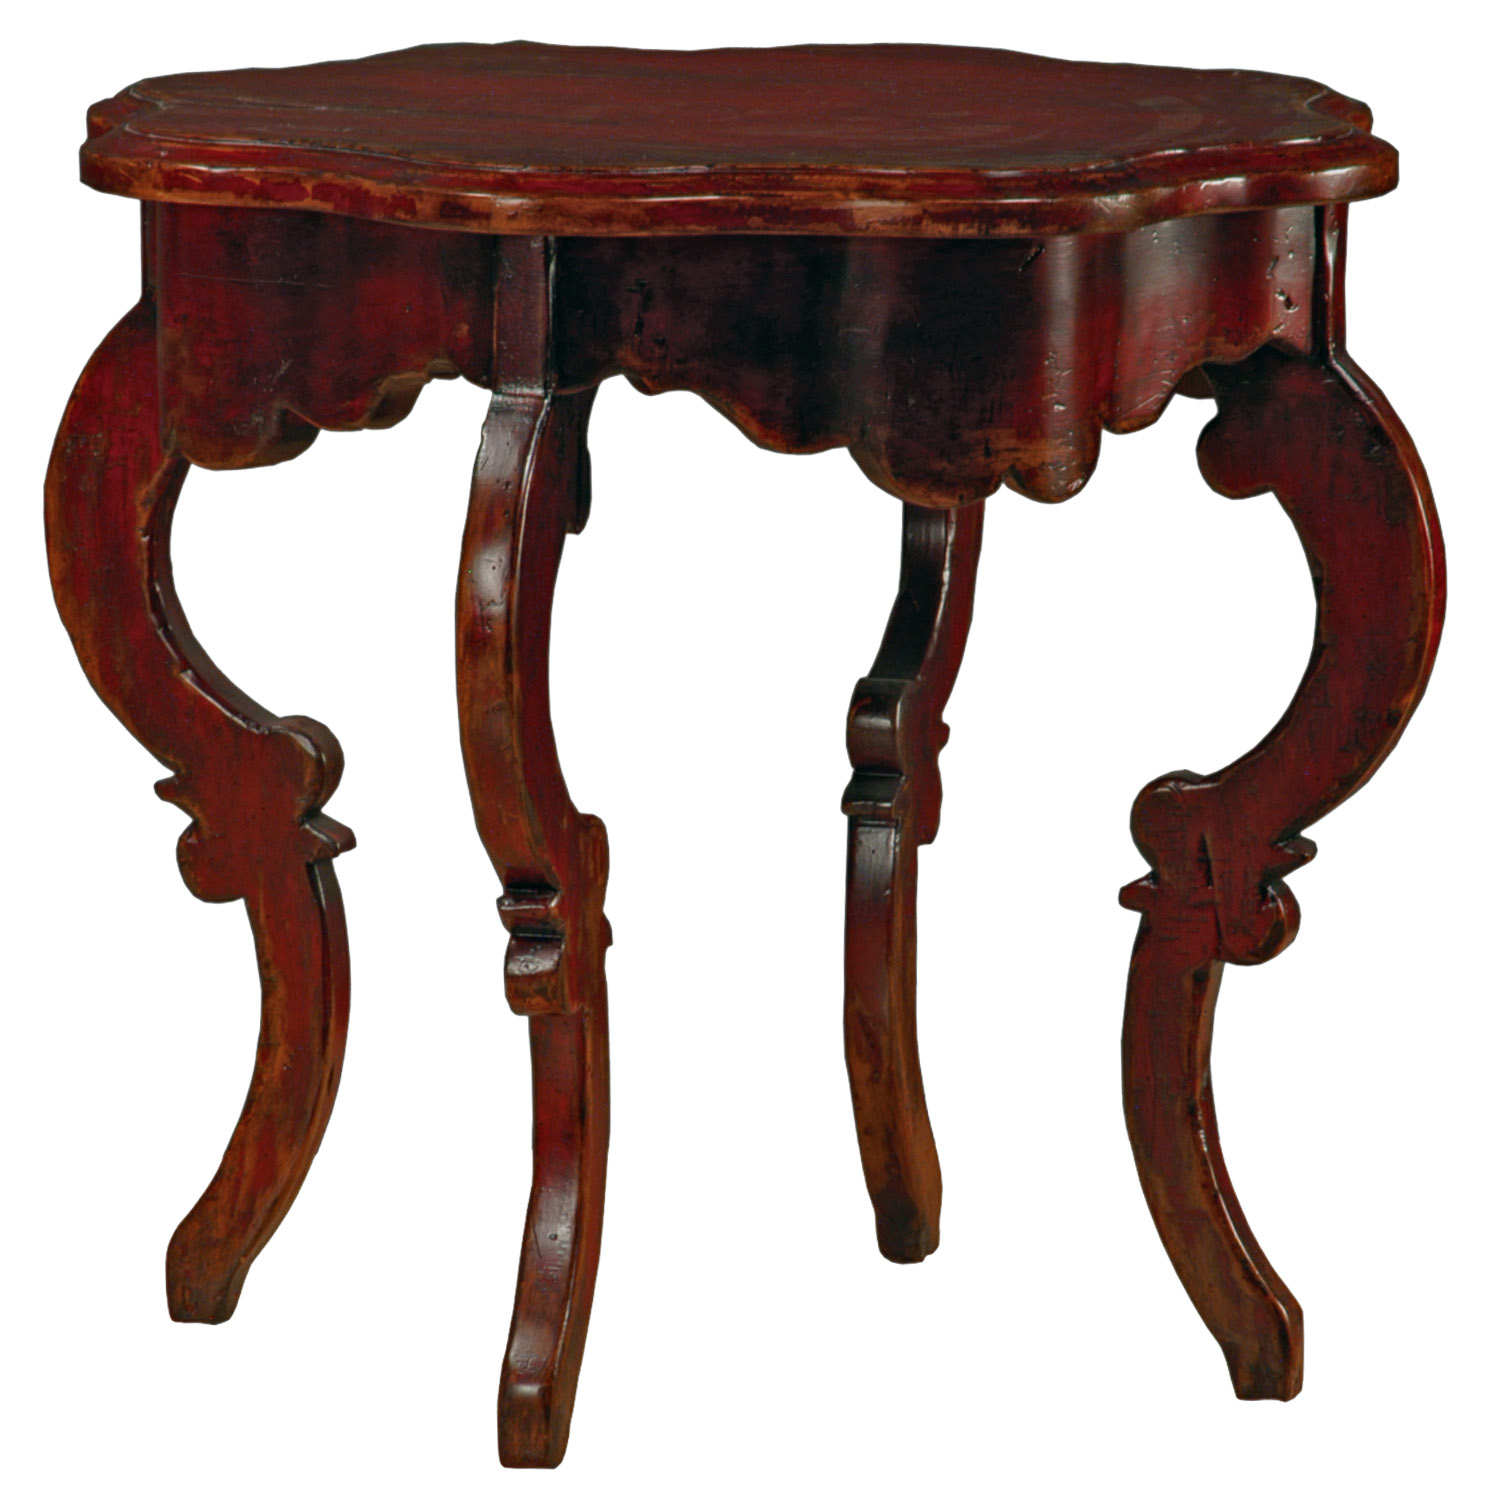 Avalon traditional curved leg side or end table by Woodland furniture in Idaho Falls